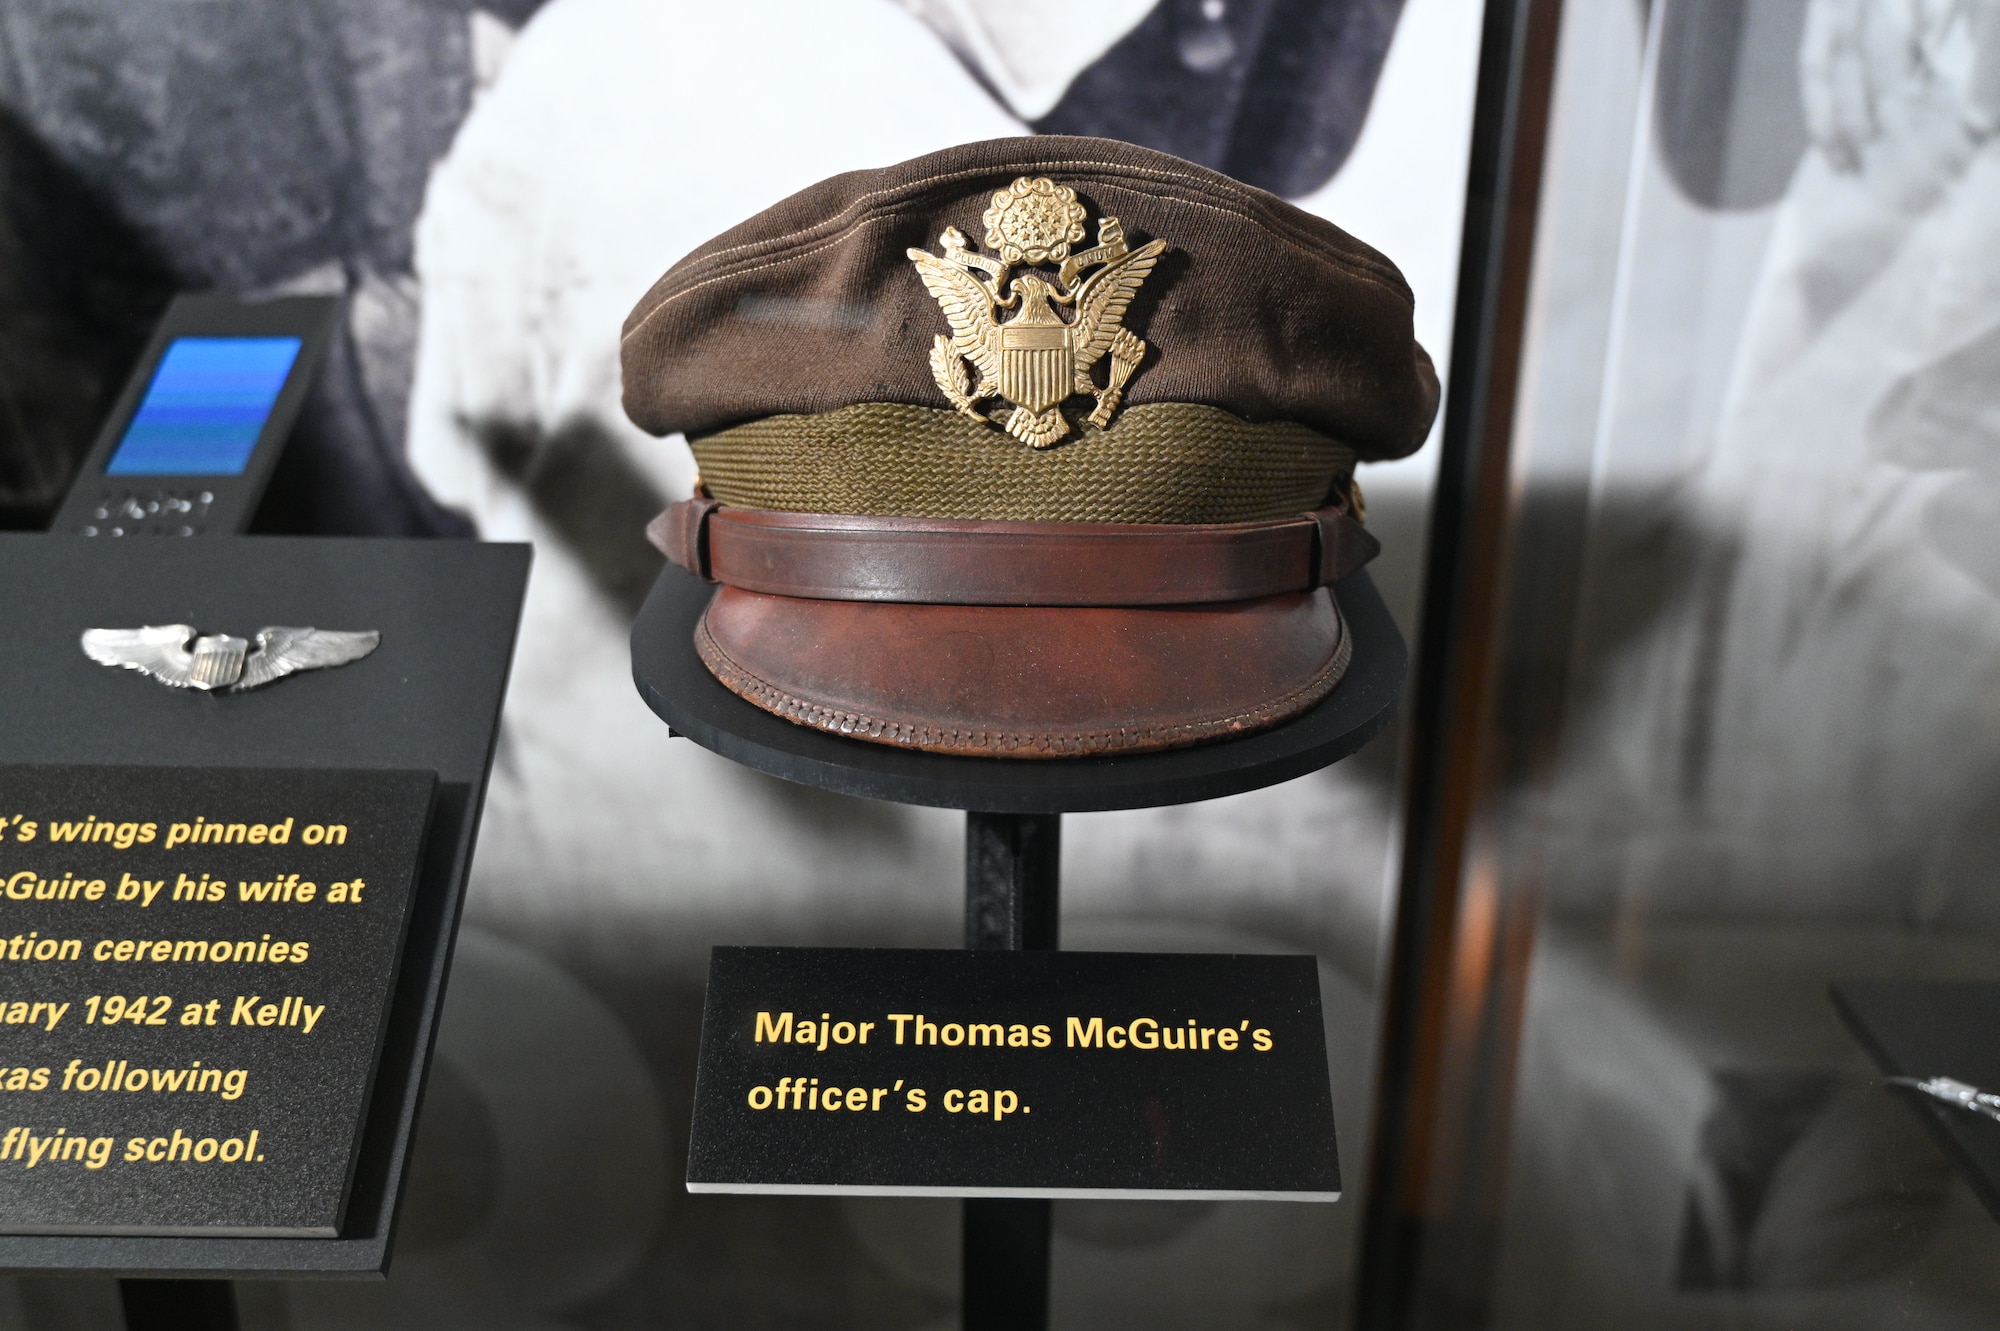 Photo of Maj. Thomas B. McGuire's officer's cap from WWII.